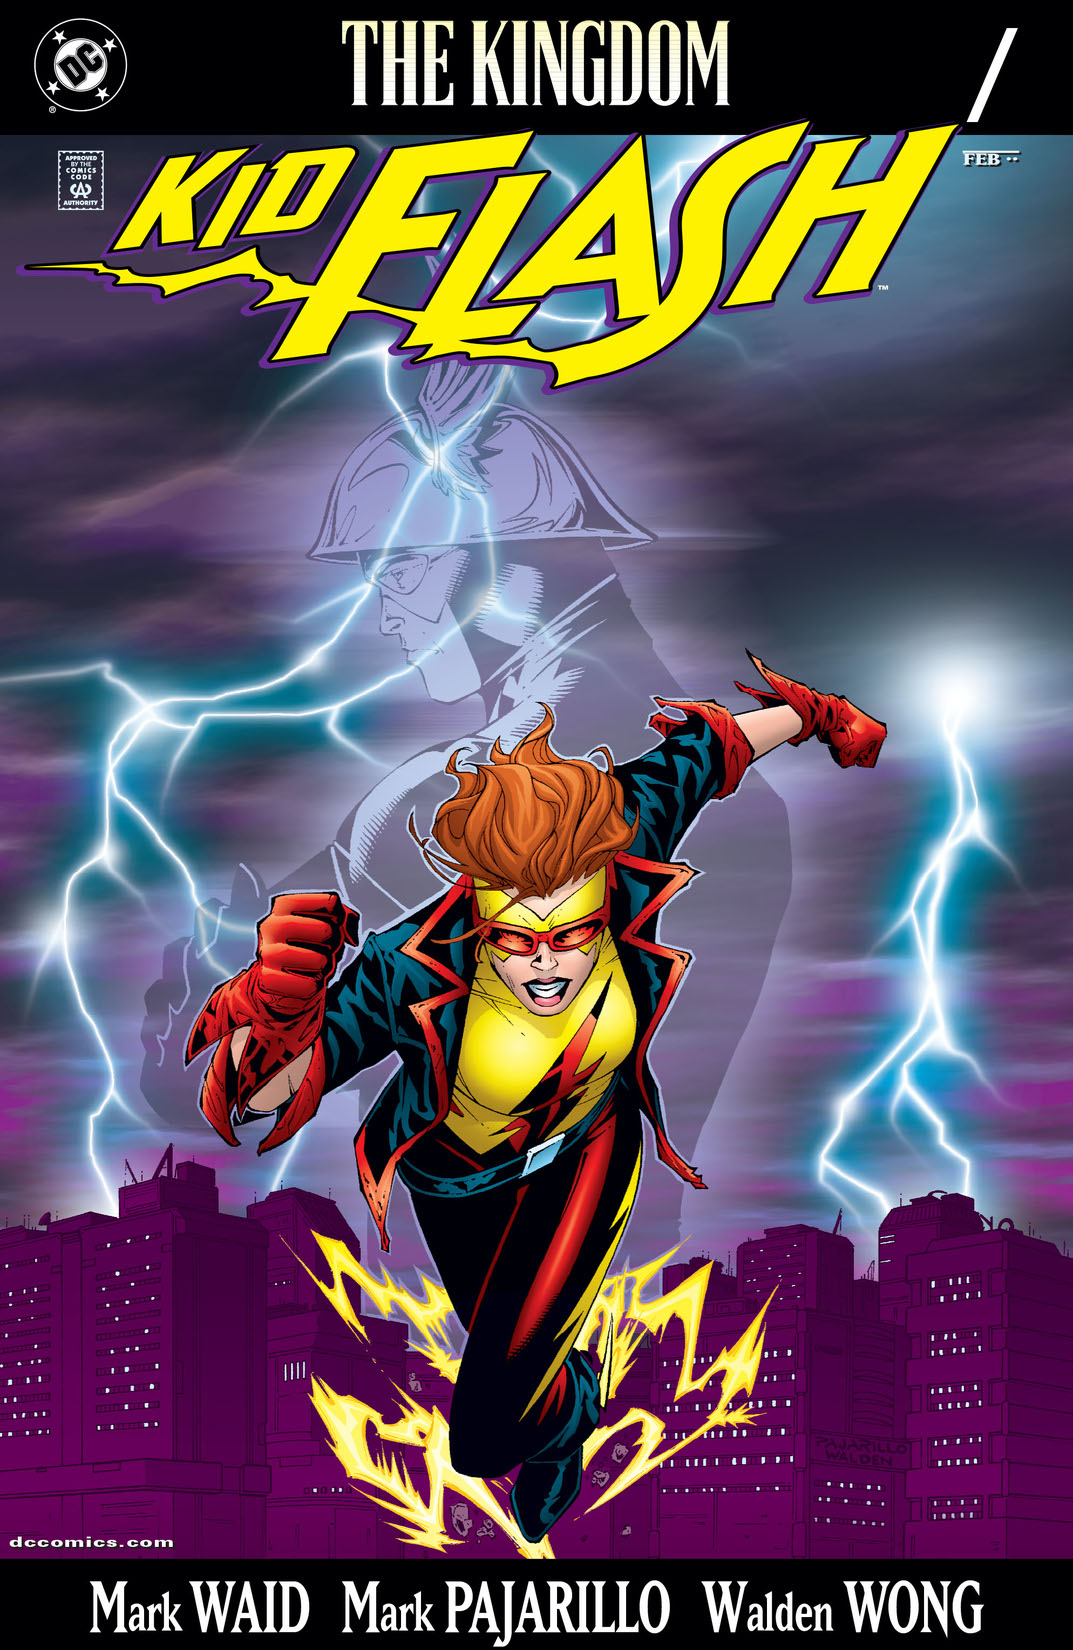 The Kingdom: Kid Flash #1 preview images